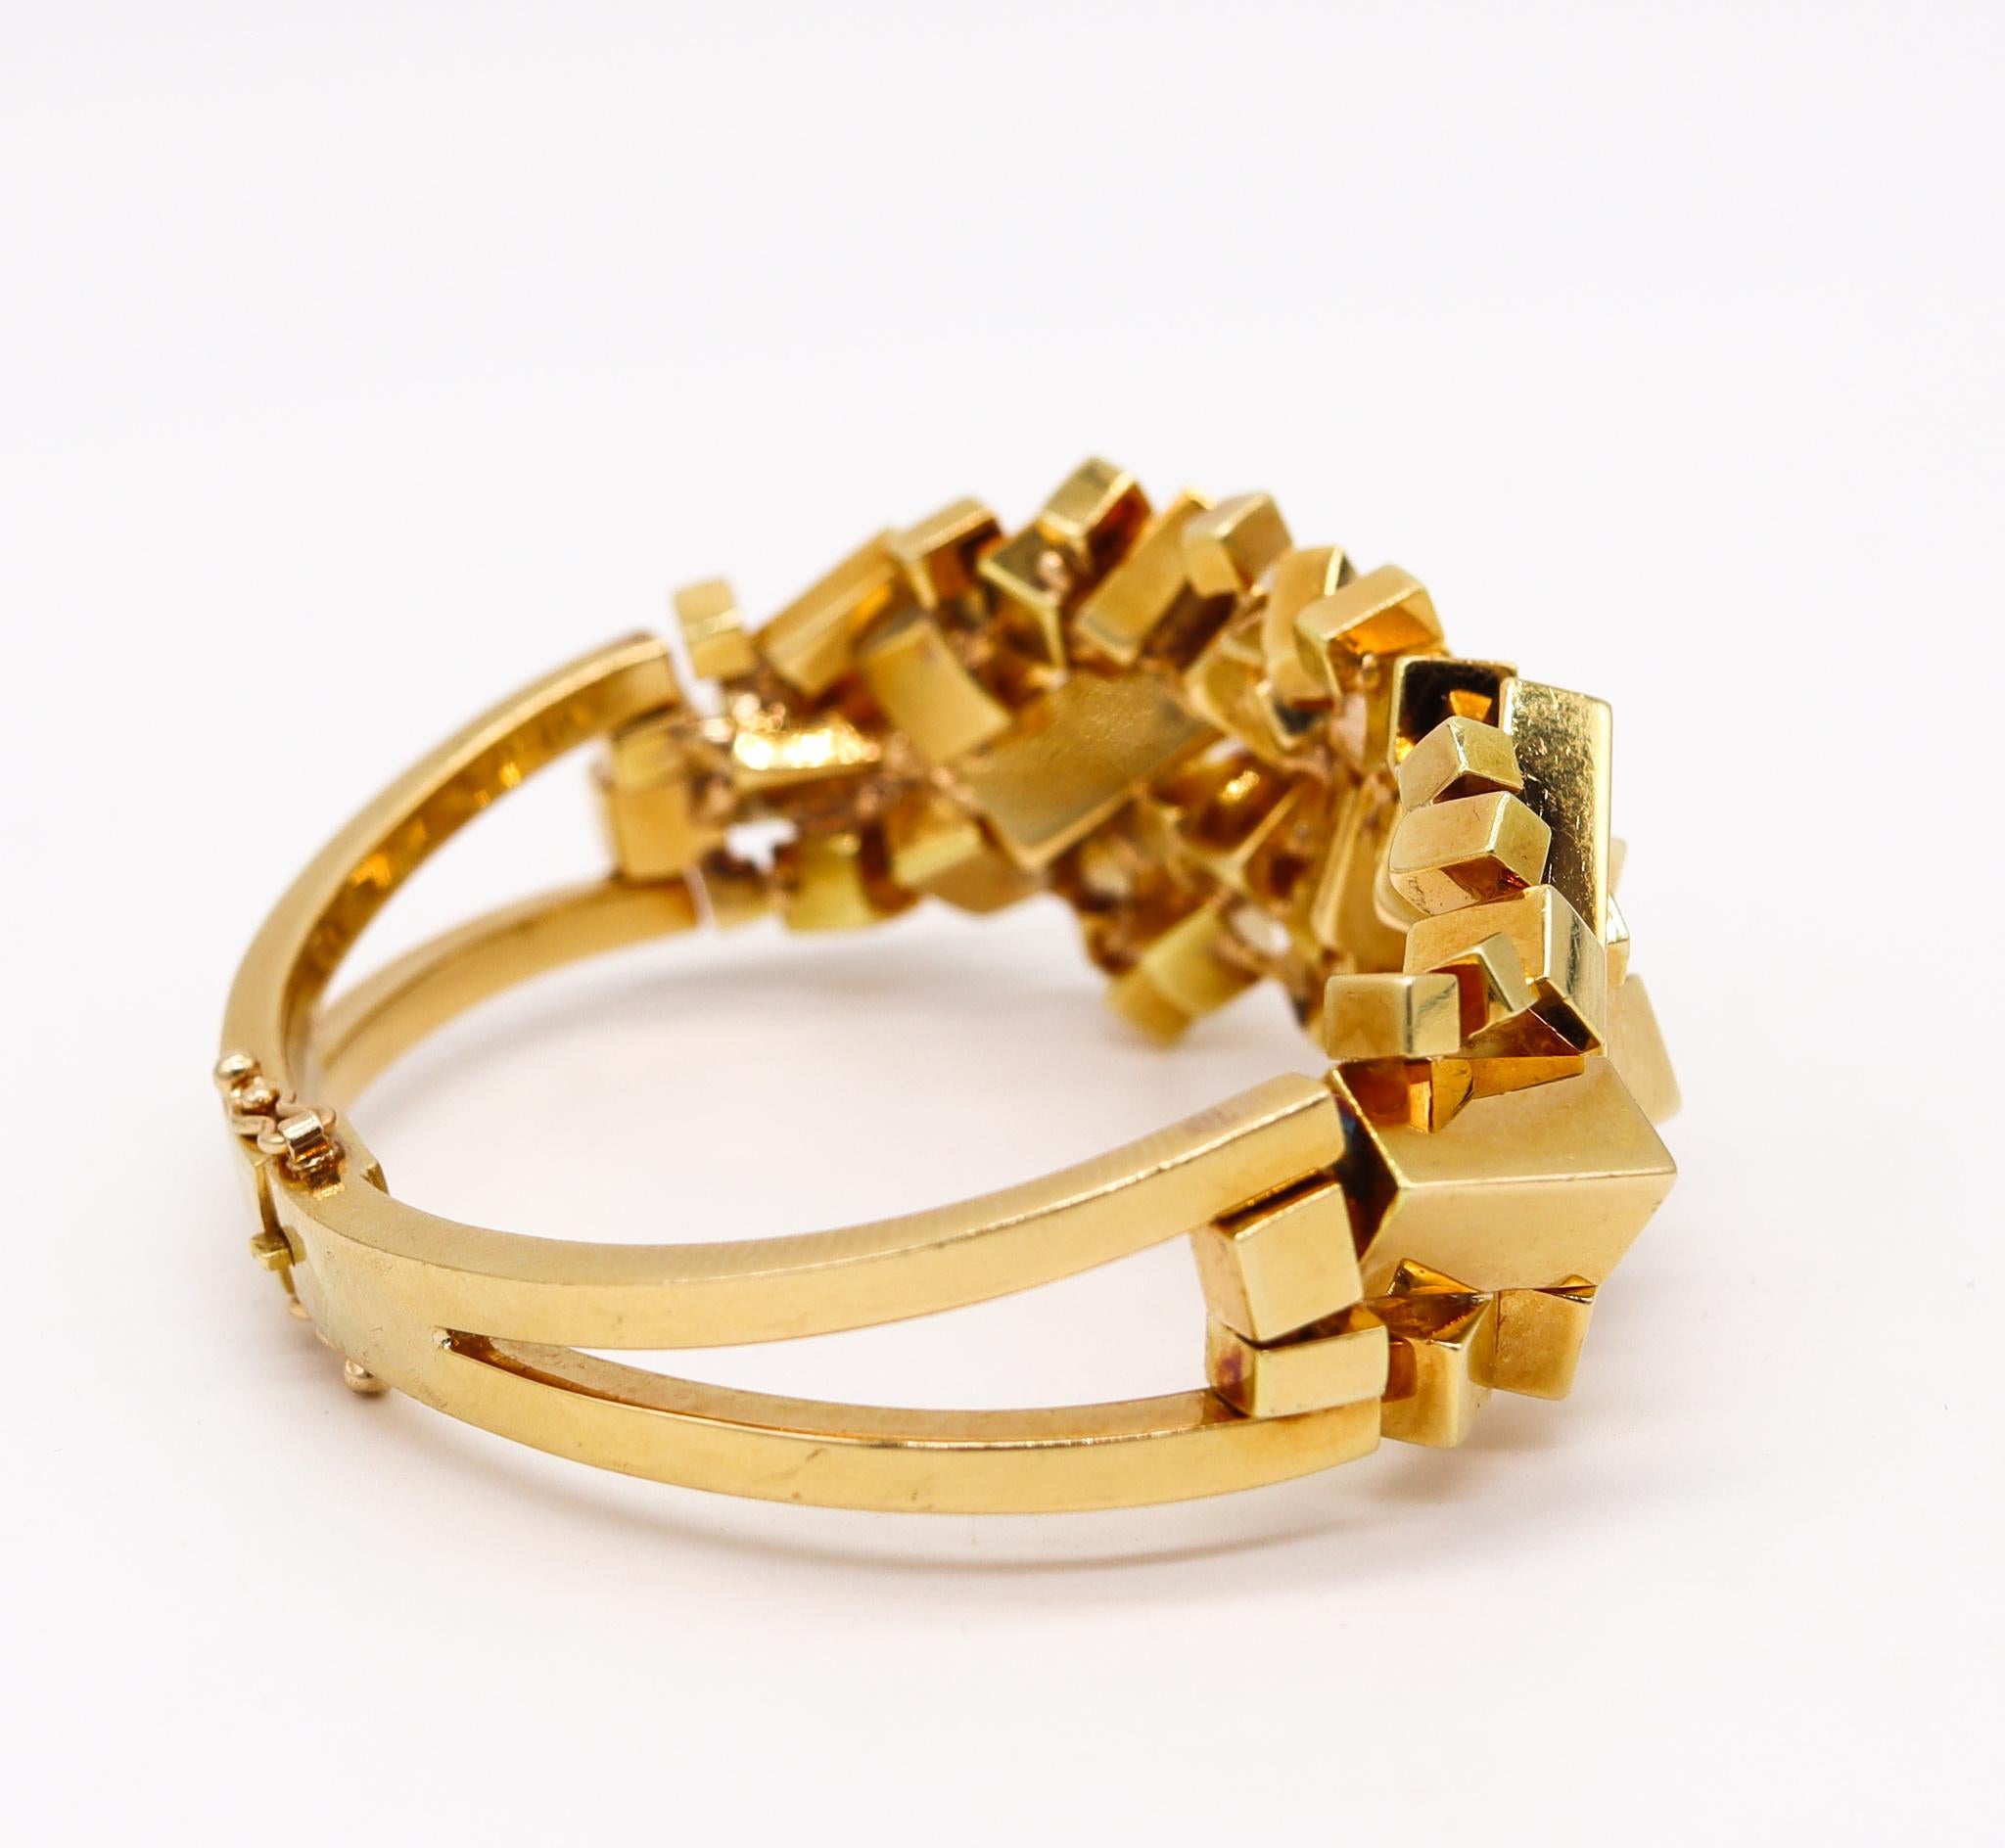 Alfred Karram 1970 New York Brutalism Geometric Cubic Bracelet In 18Kt Gold In Excellent Condition In Miami, FL